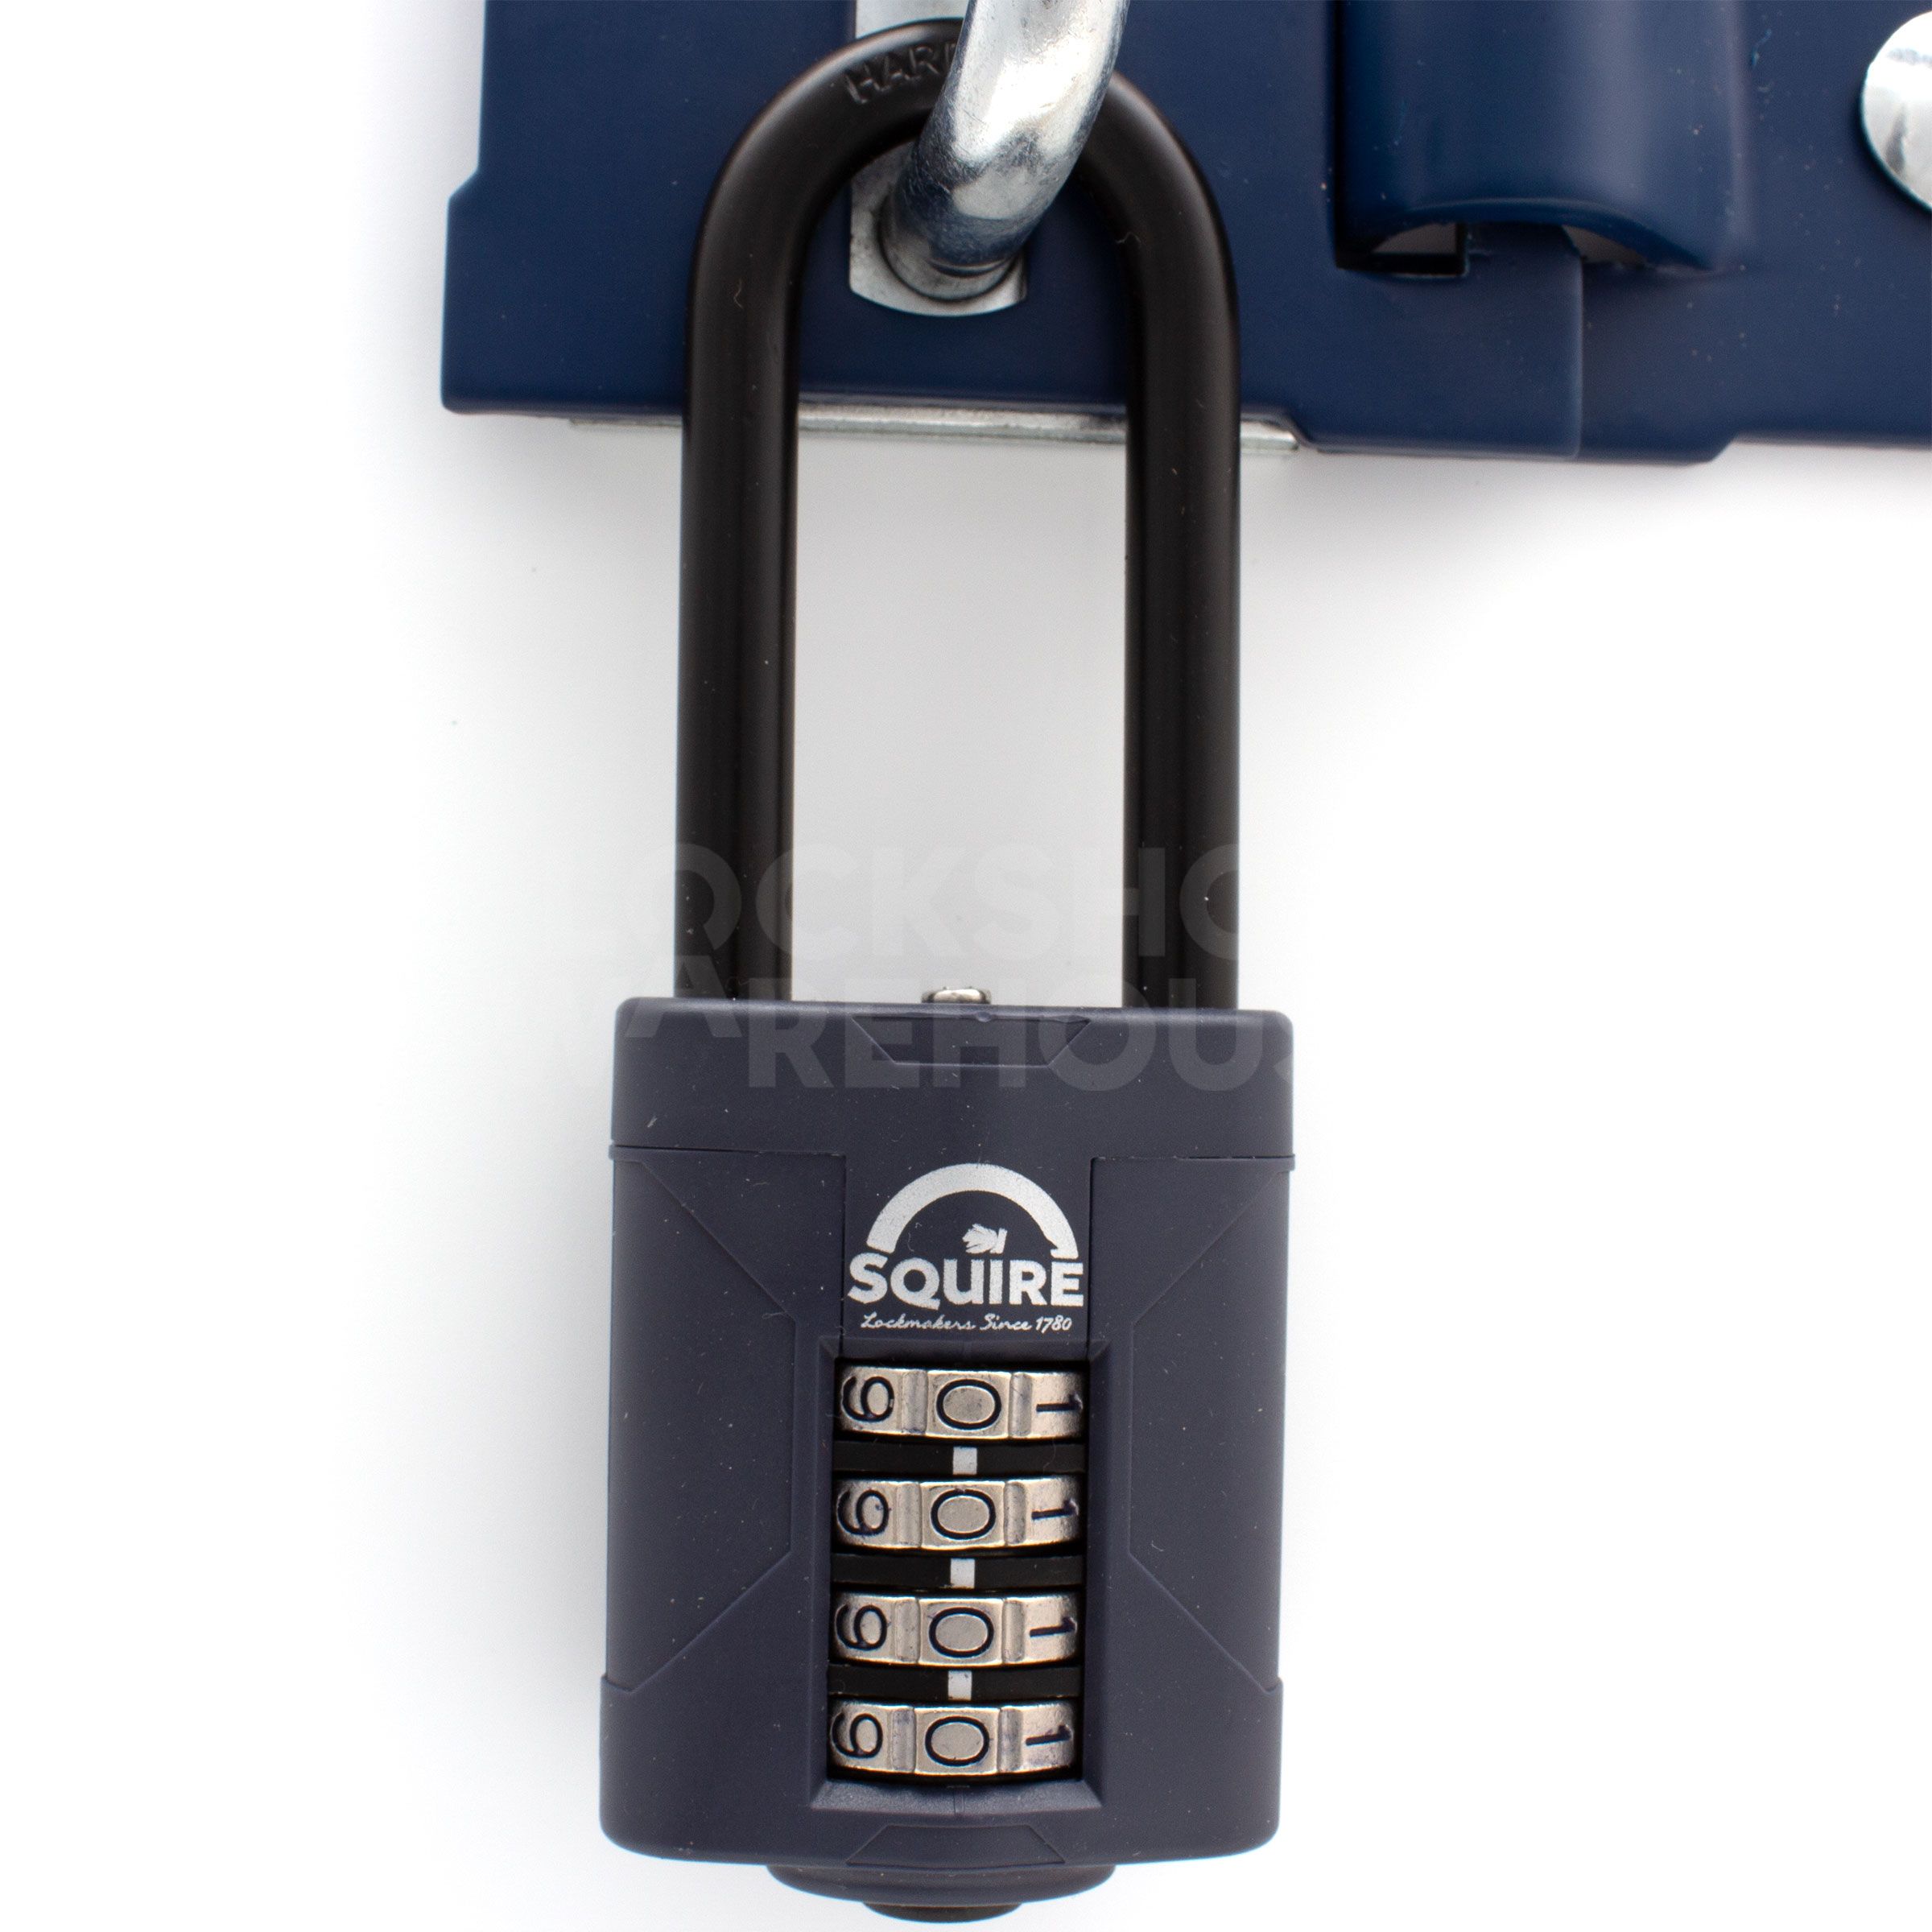 Squire CP50/2.5 Recodable Long shackle Combination Padlock